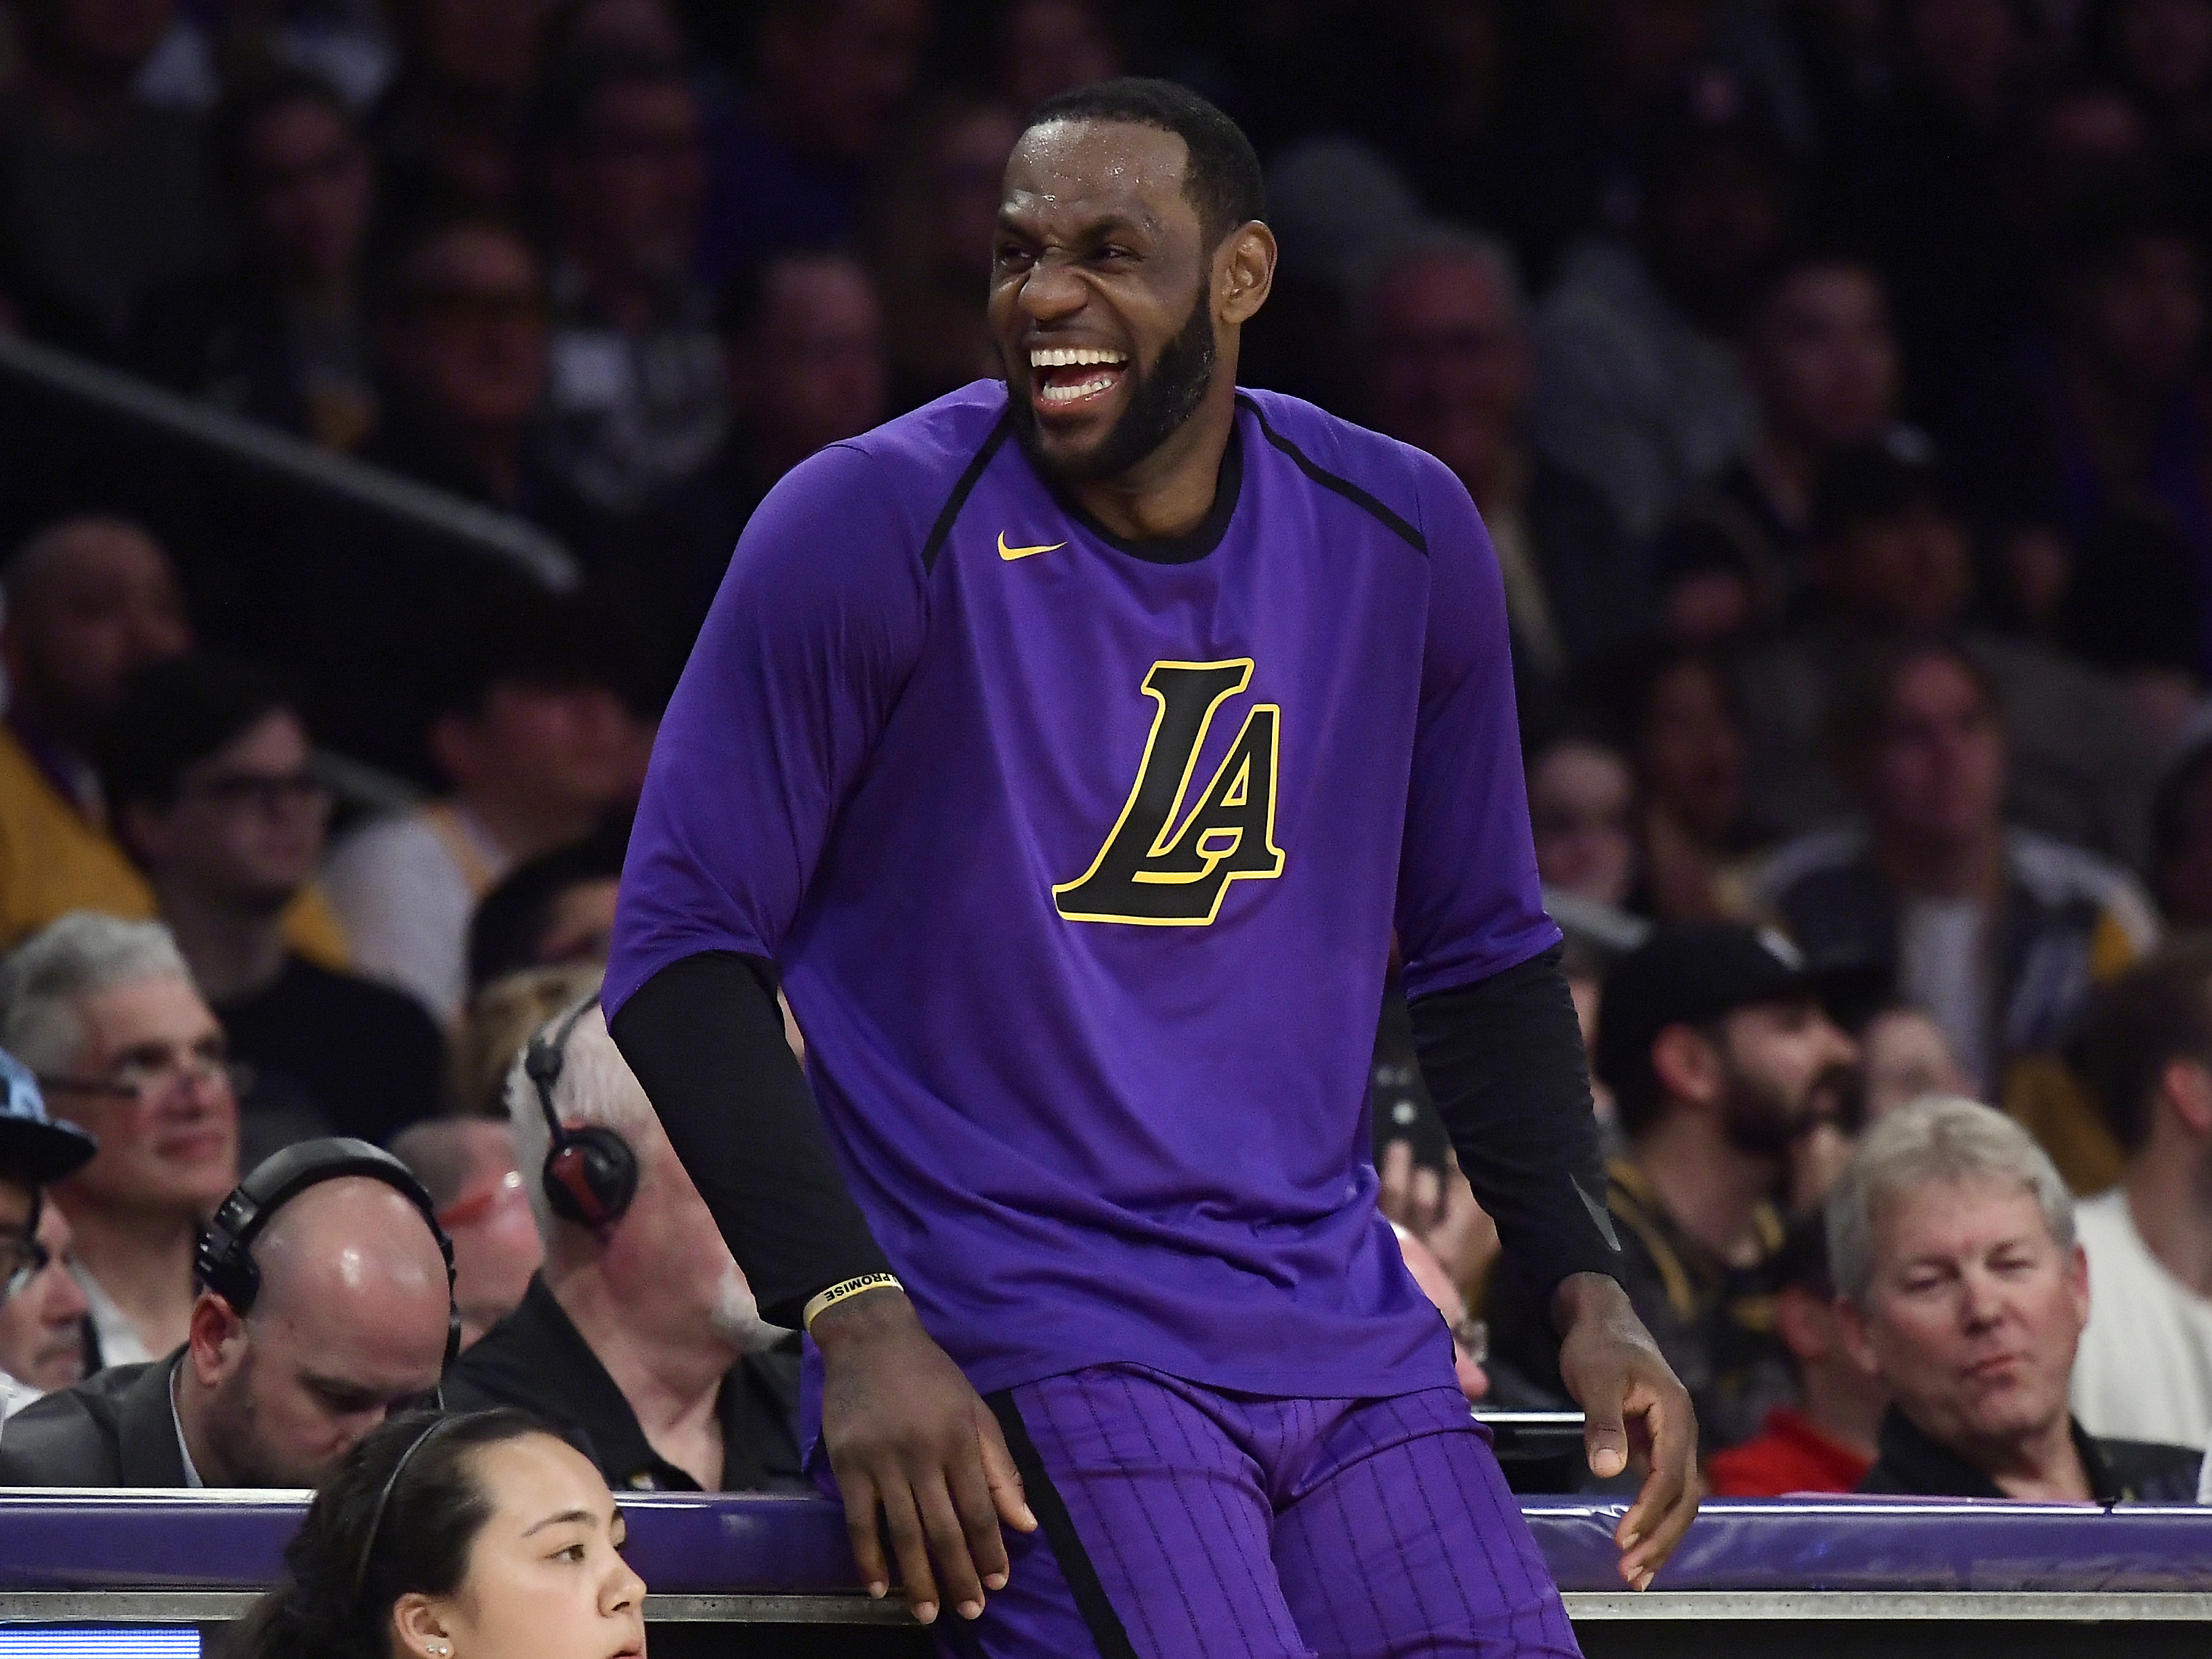 LeBron James to sit out rest of the season